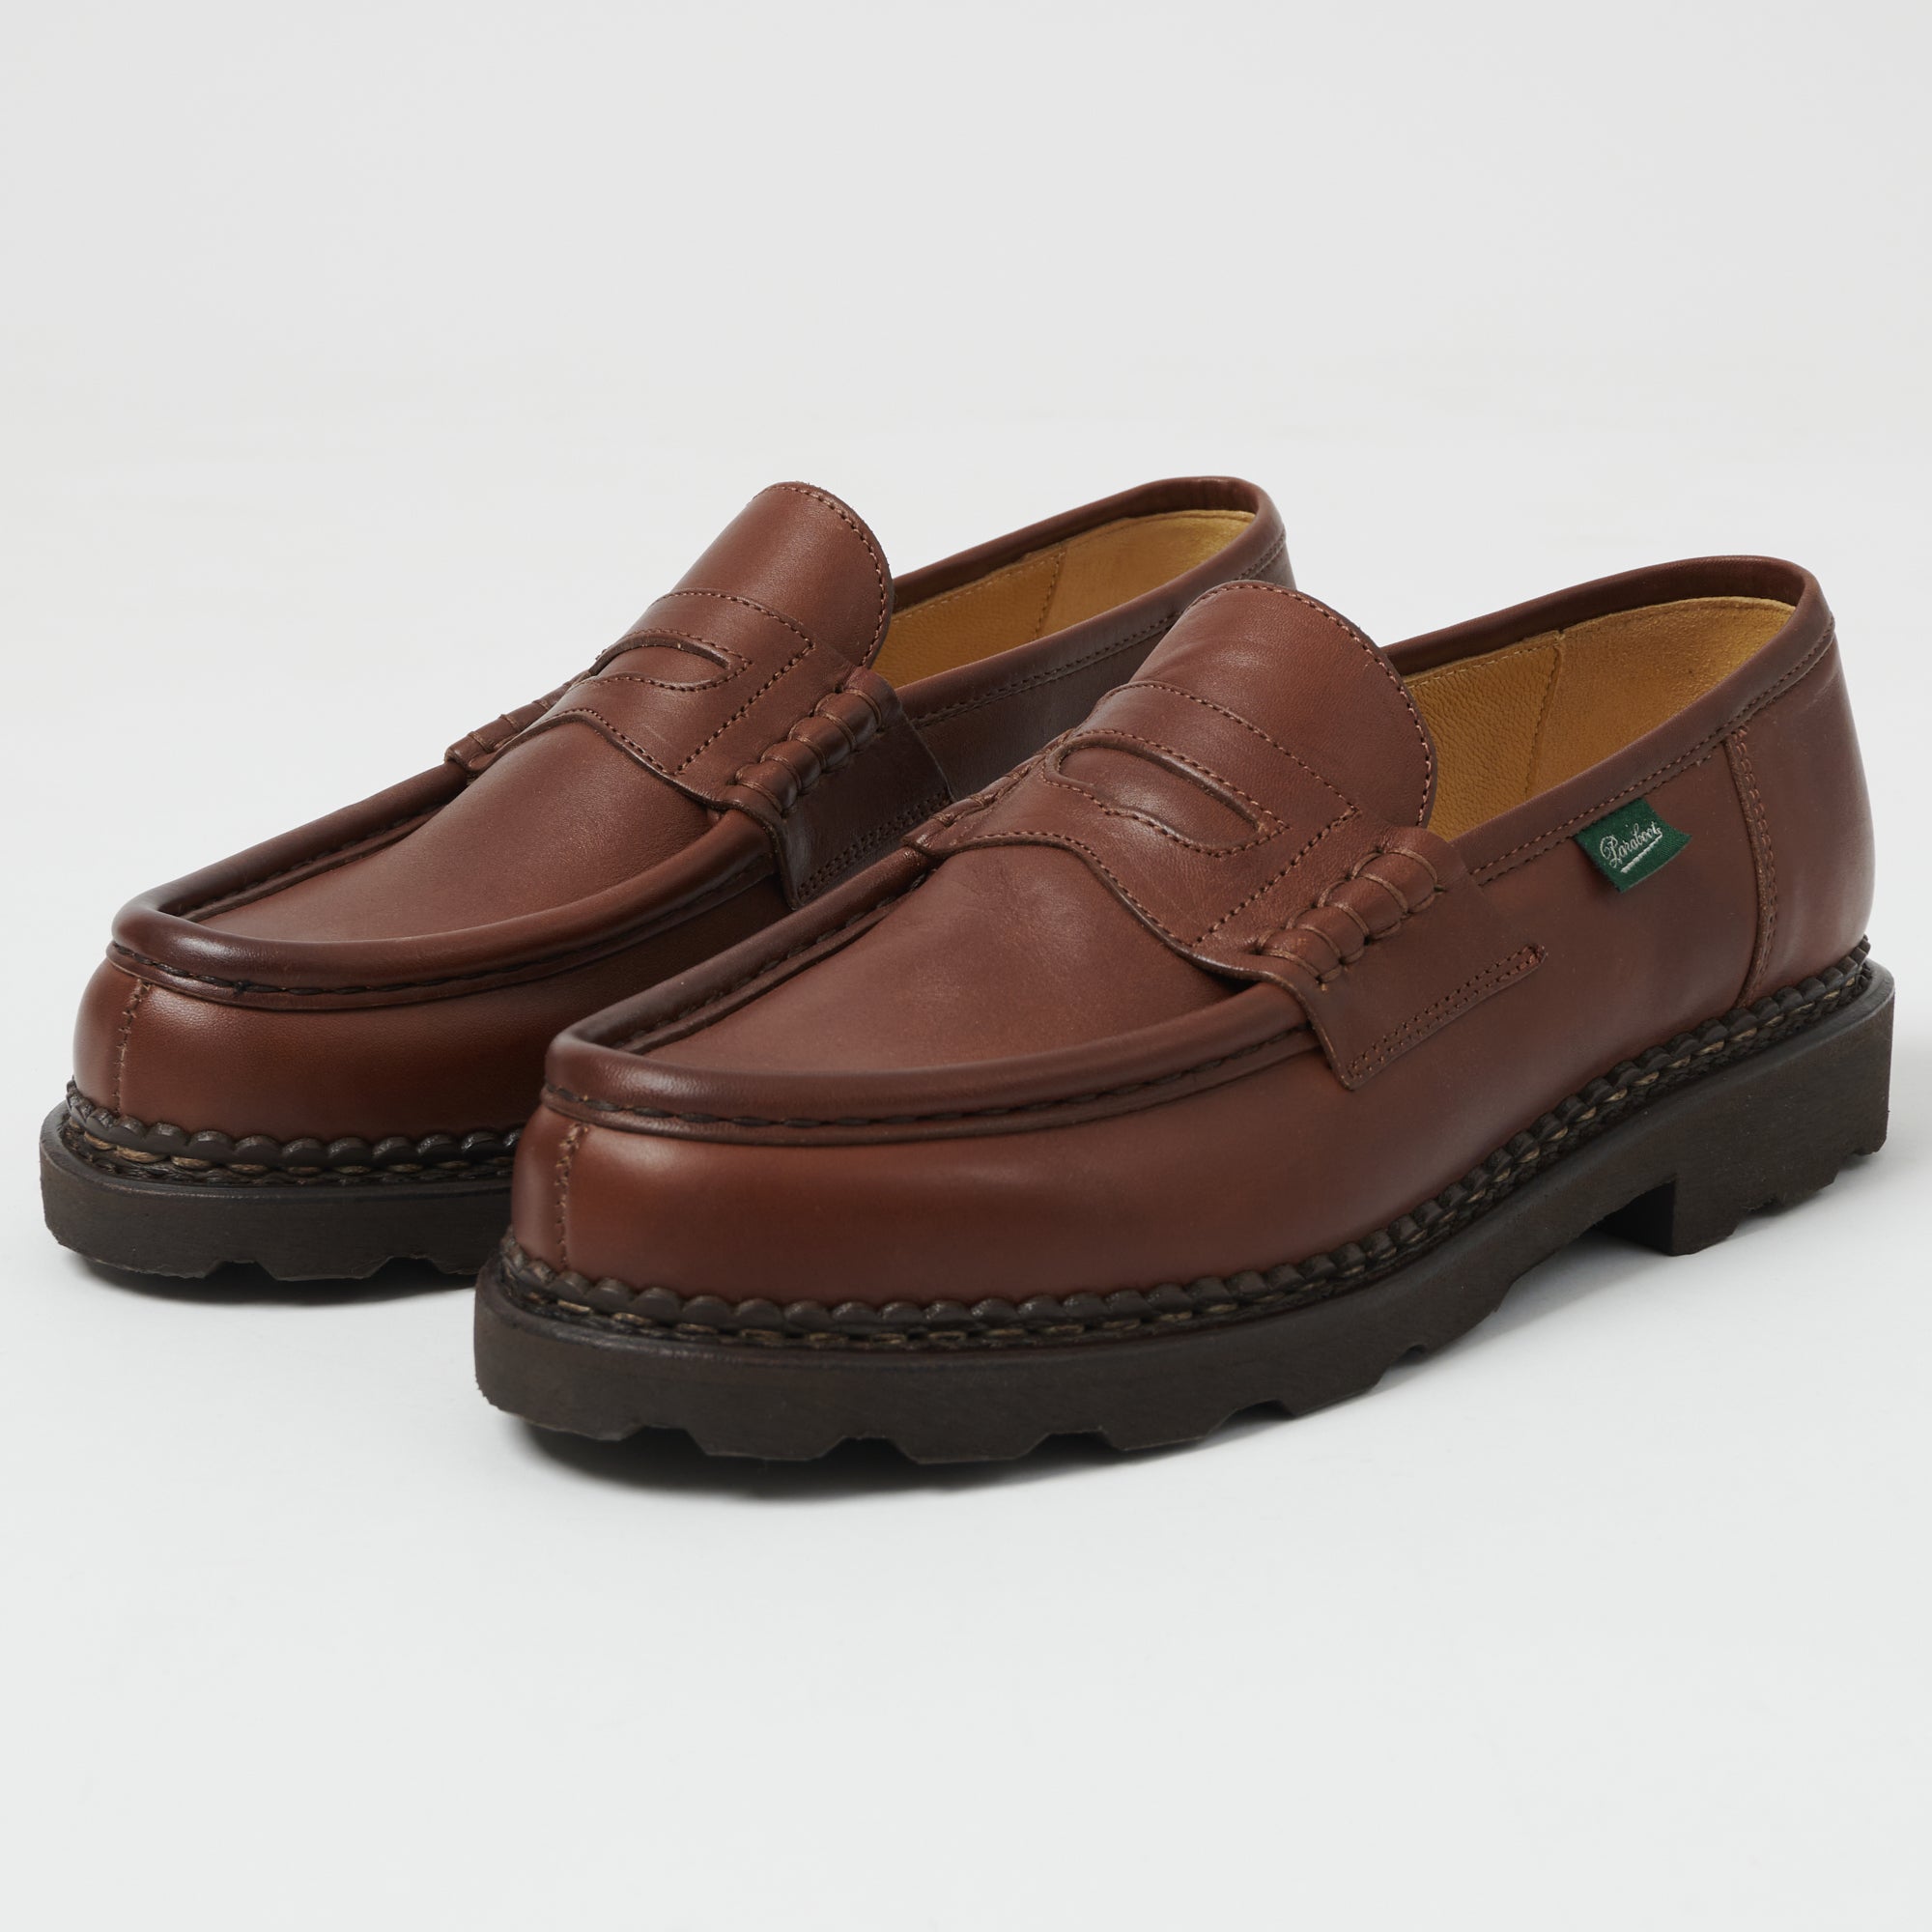 Paraboot Reims Loafer - Brown Lisse Marron